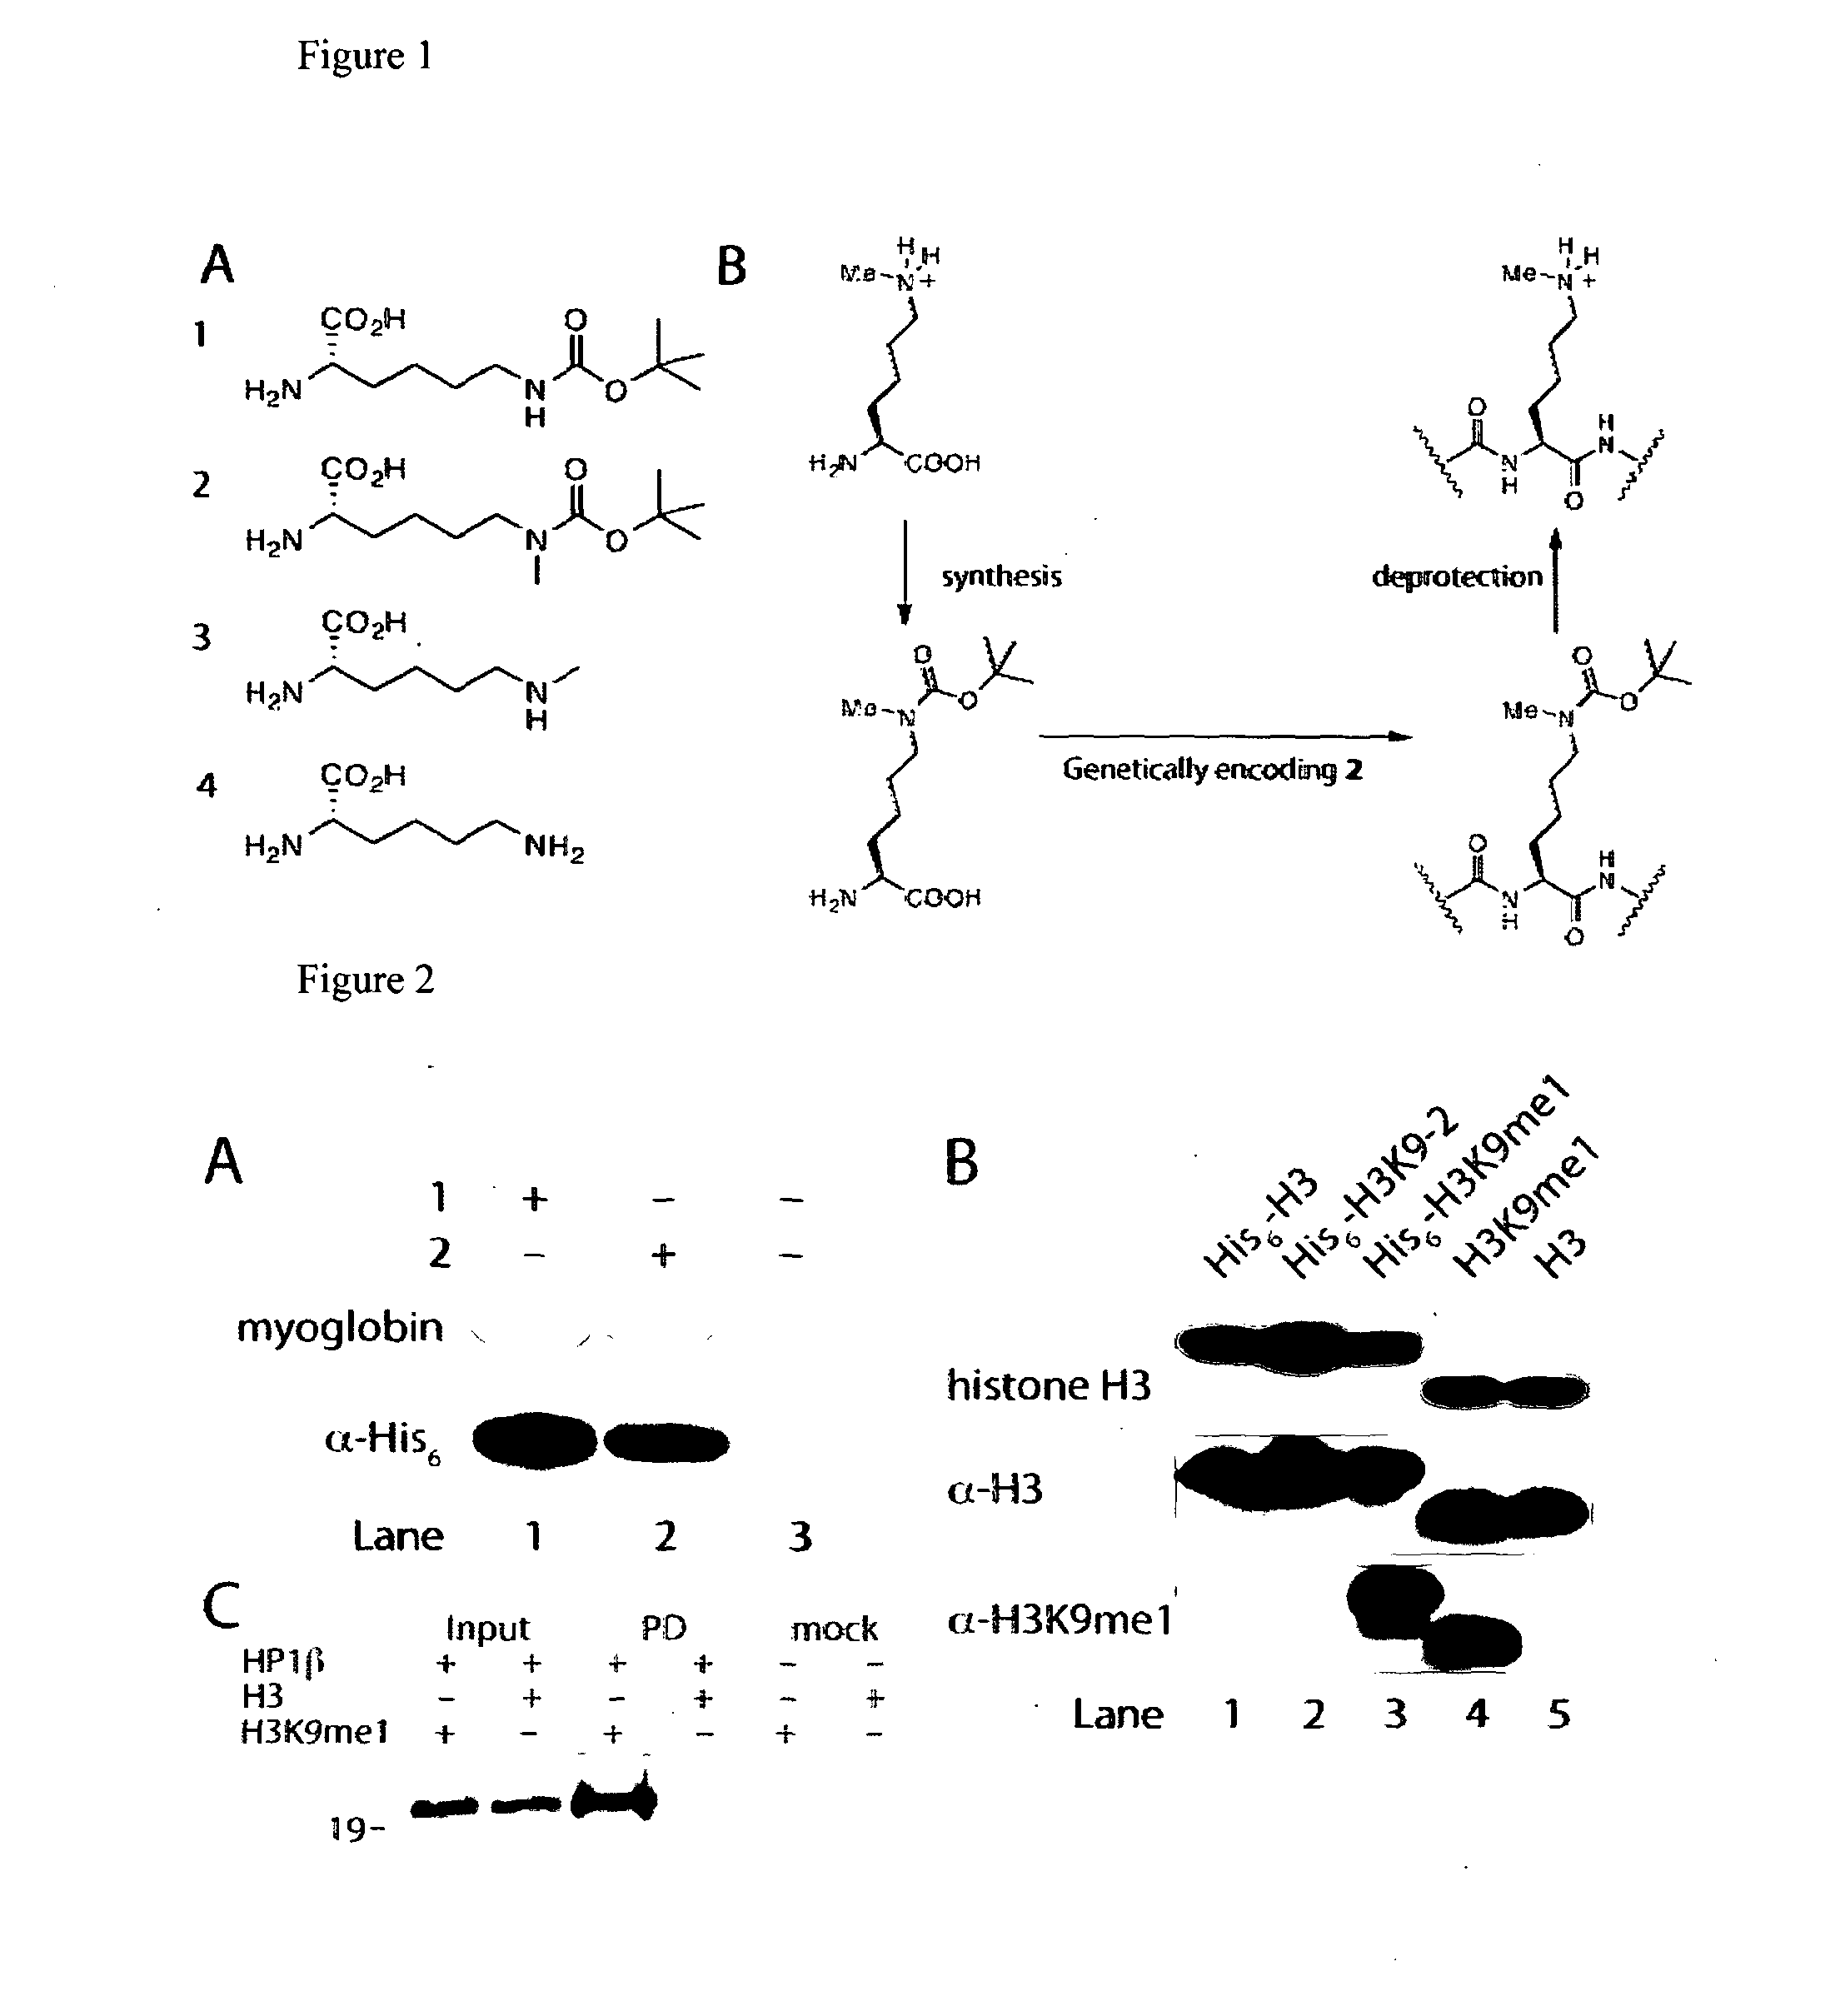 Incorporation of methyl lysine into polypeptides